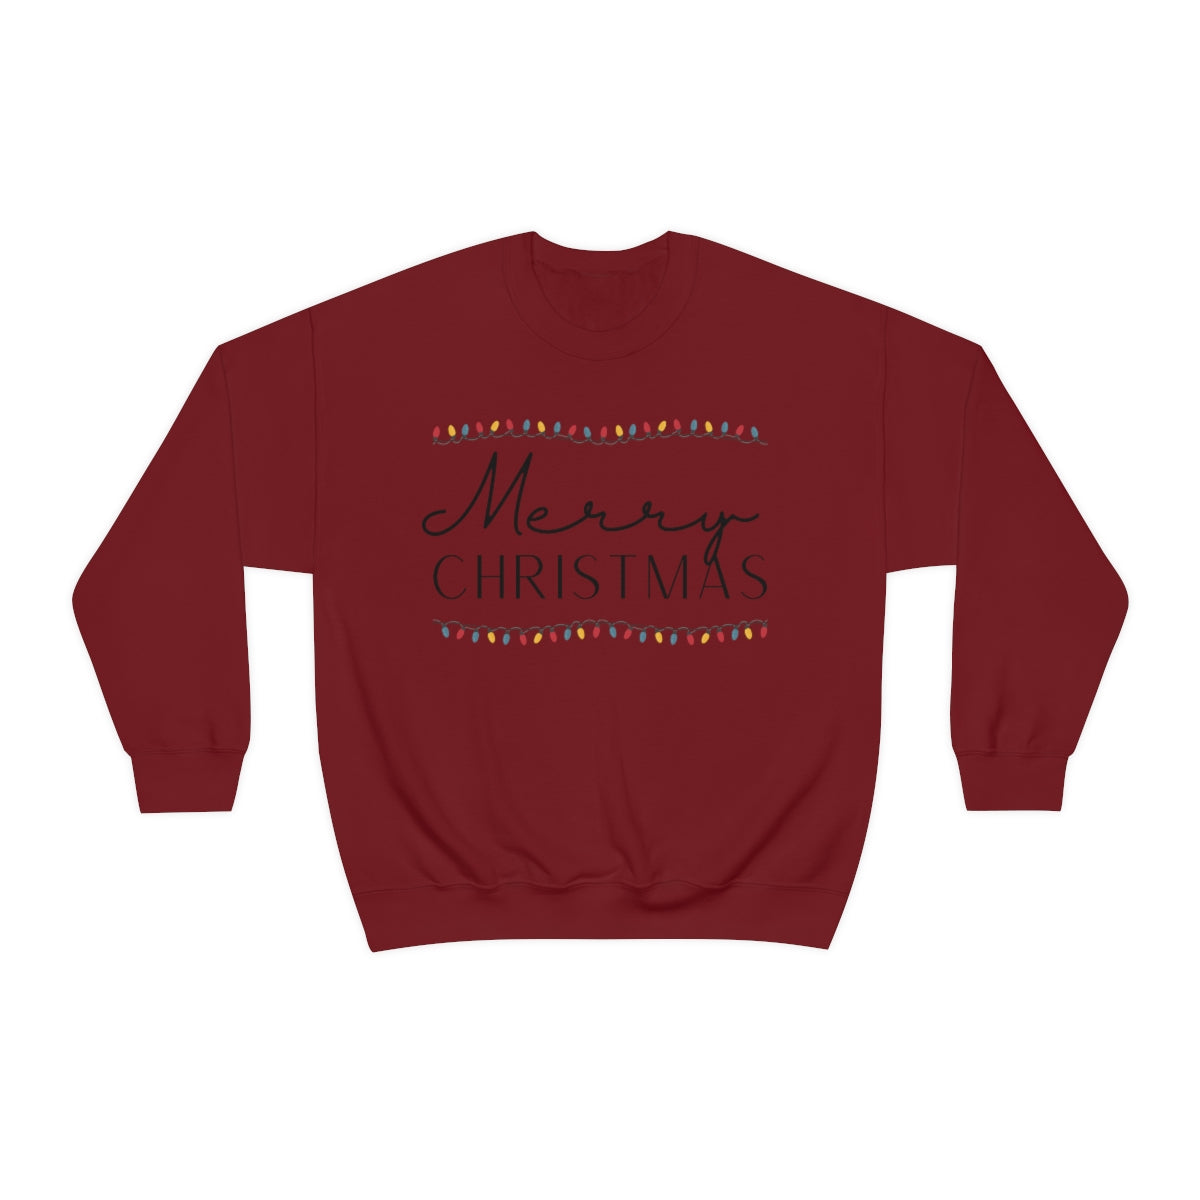 Merry Christmas Sweatshirt with Color Lights String